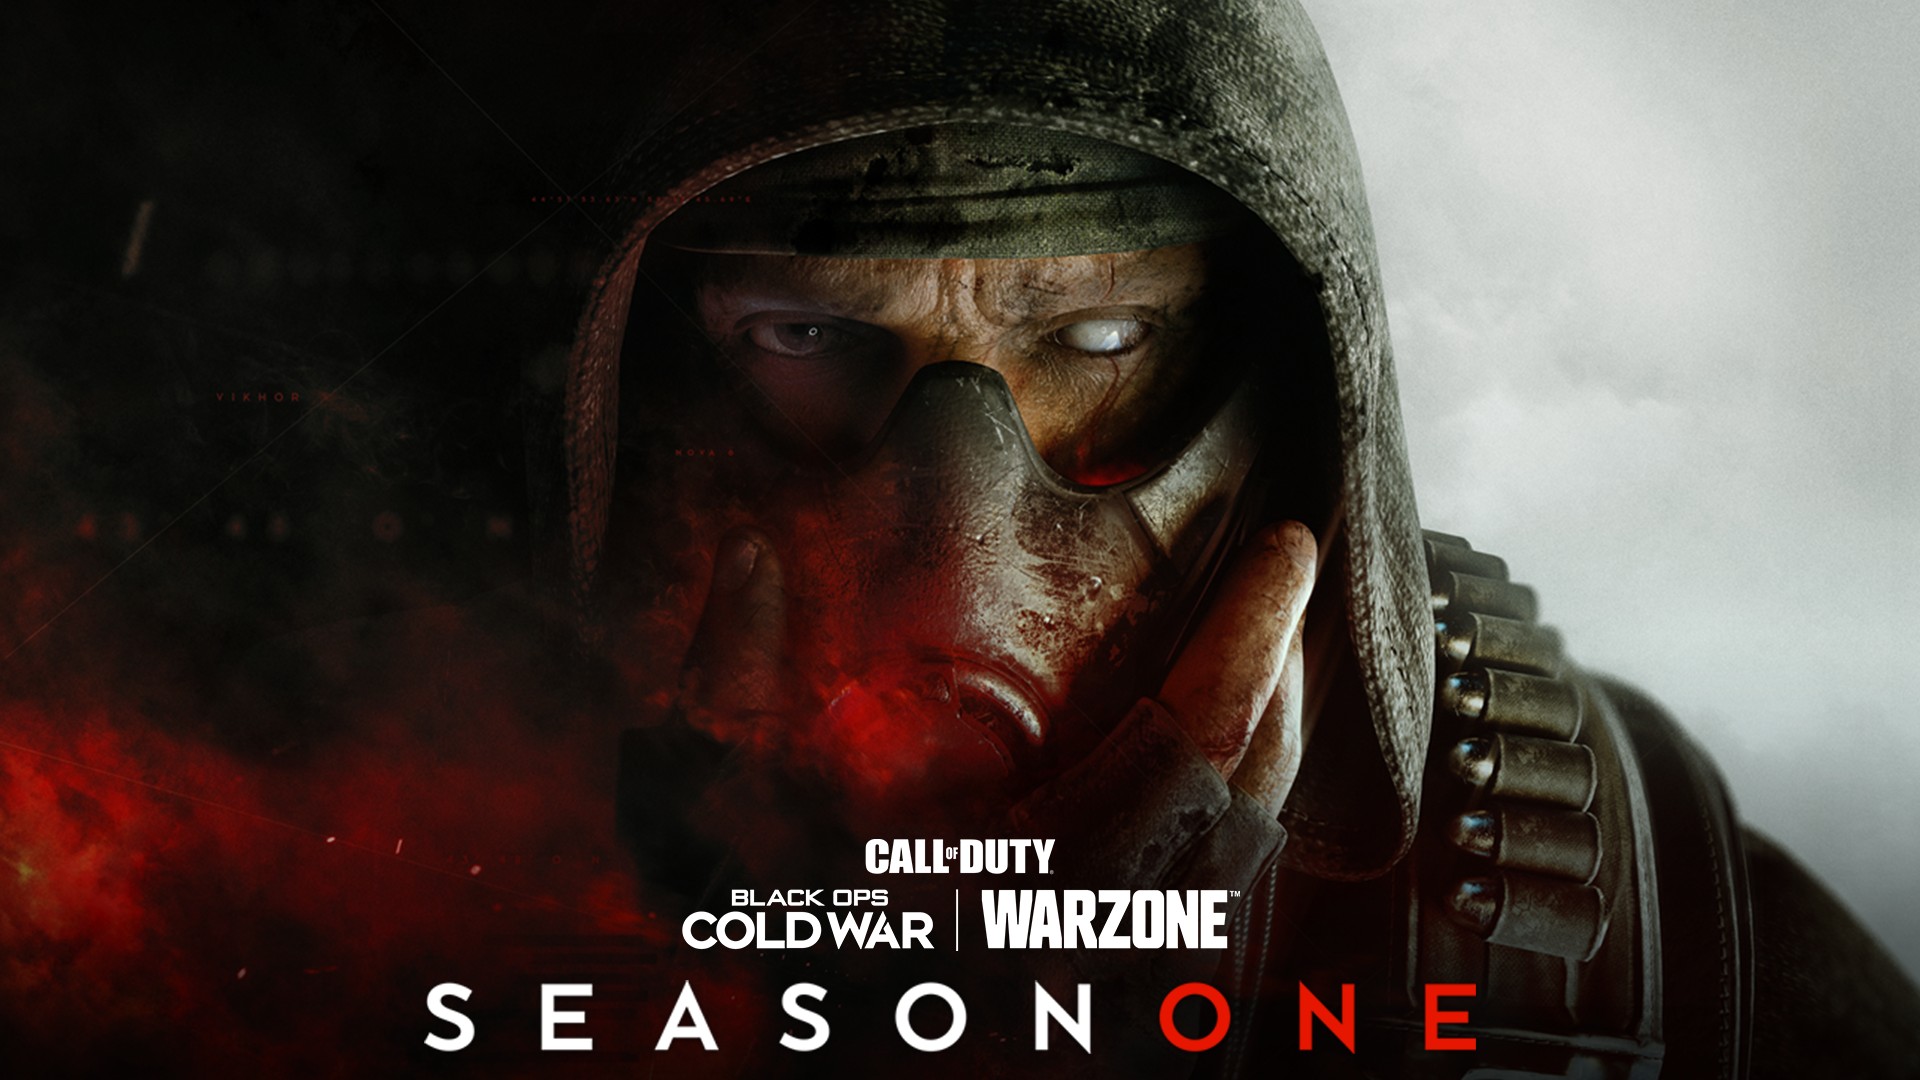 Call of Duty: Black Ops Cold War and Warzone Season One